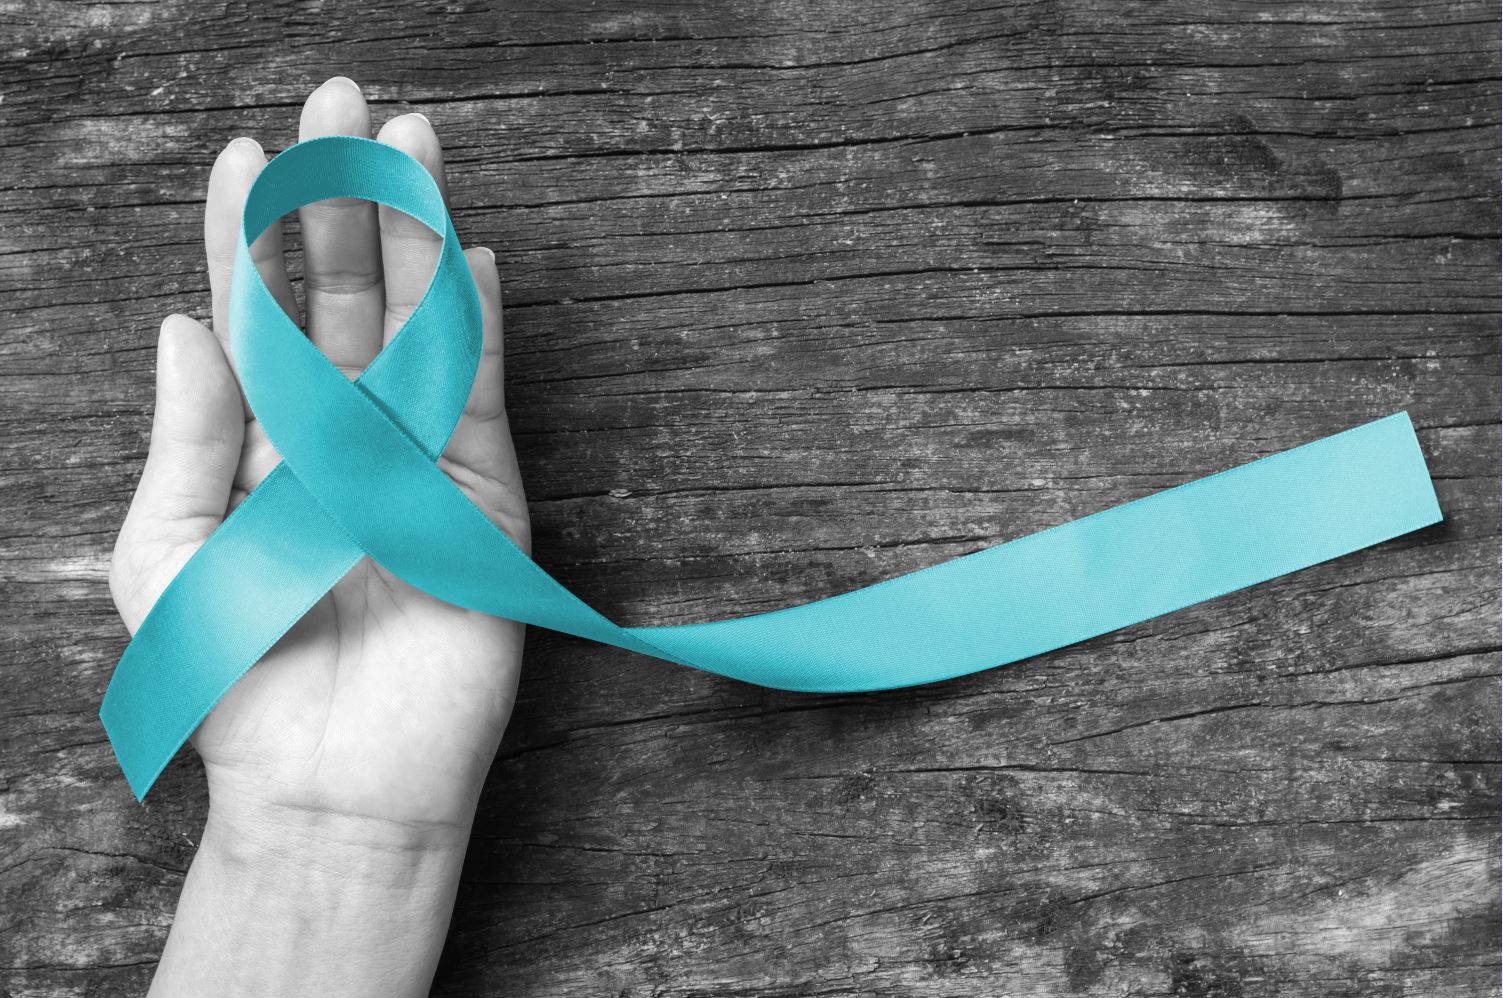 Grayscale image of a female hand with vivid Sexual Assault Awareness teal ribbon being held